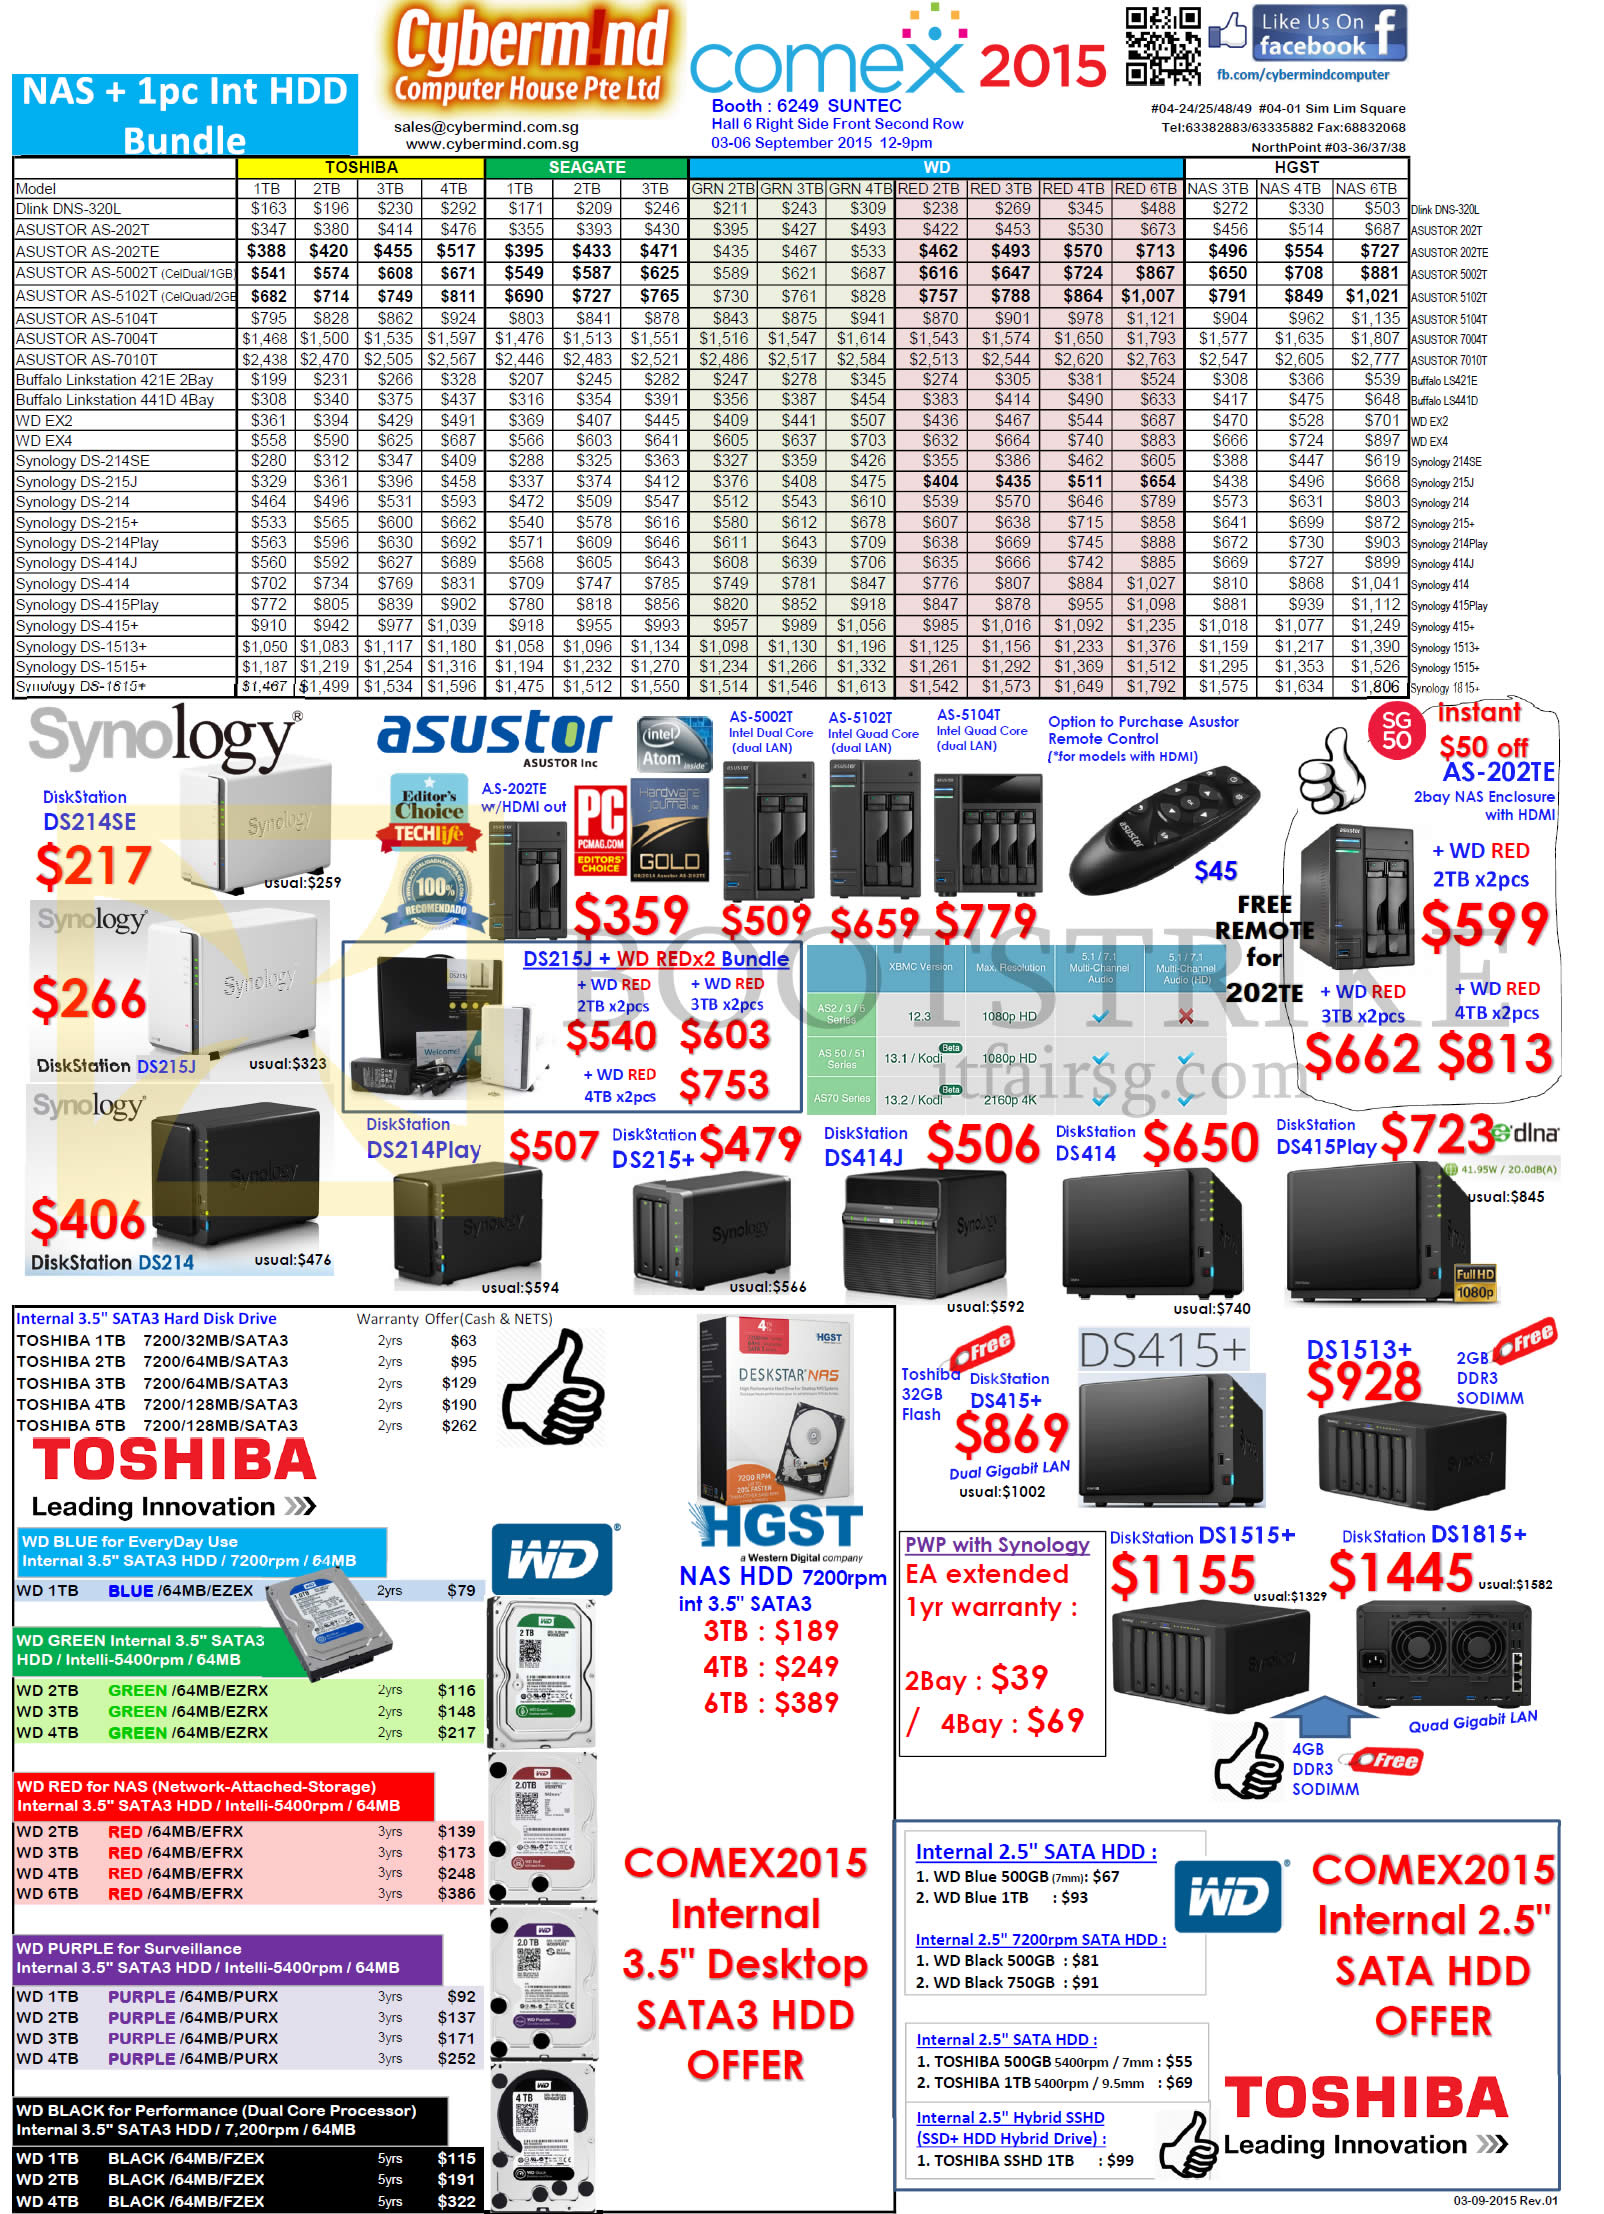 COMEX 2015 price list image brochure of Cybermind NAS, Synology Diskstations, Toshiba Internal HDDs WD Green, Blue, Red, Purple, HGST, Asustor